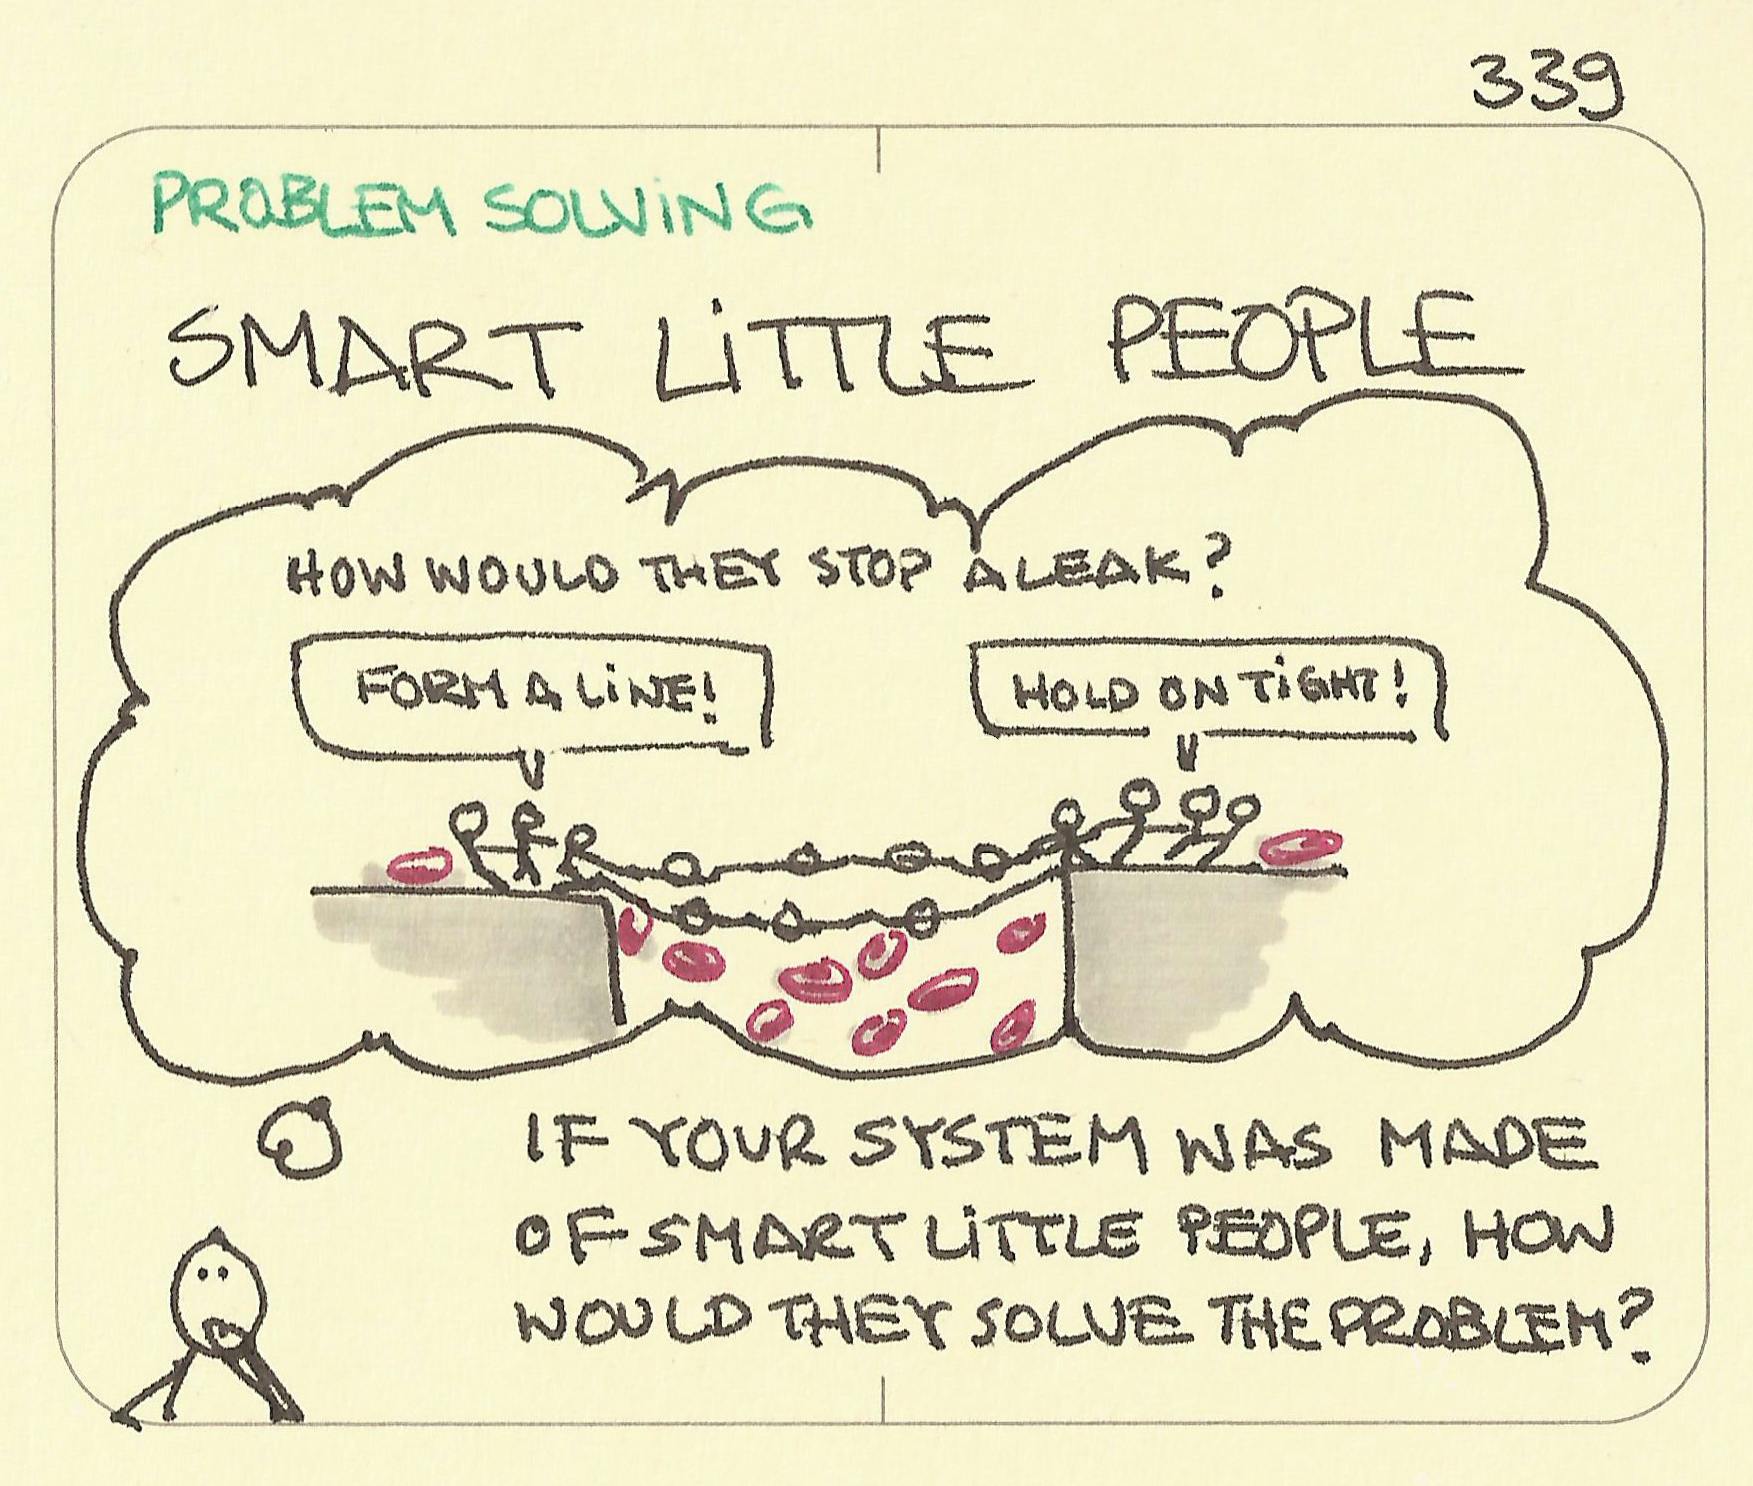 The Smart Little People problem-solving method from TRIZ: someone wonders how little people would solve a technical problem of fixing a leak